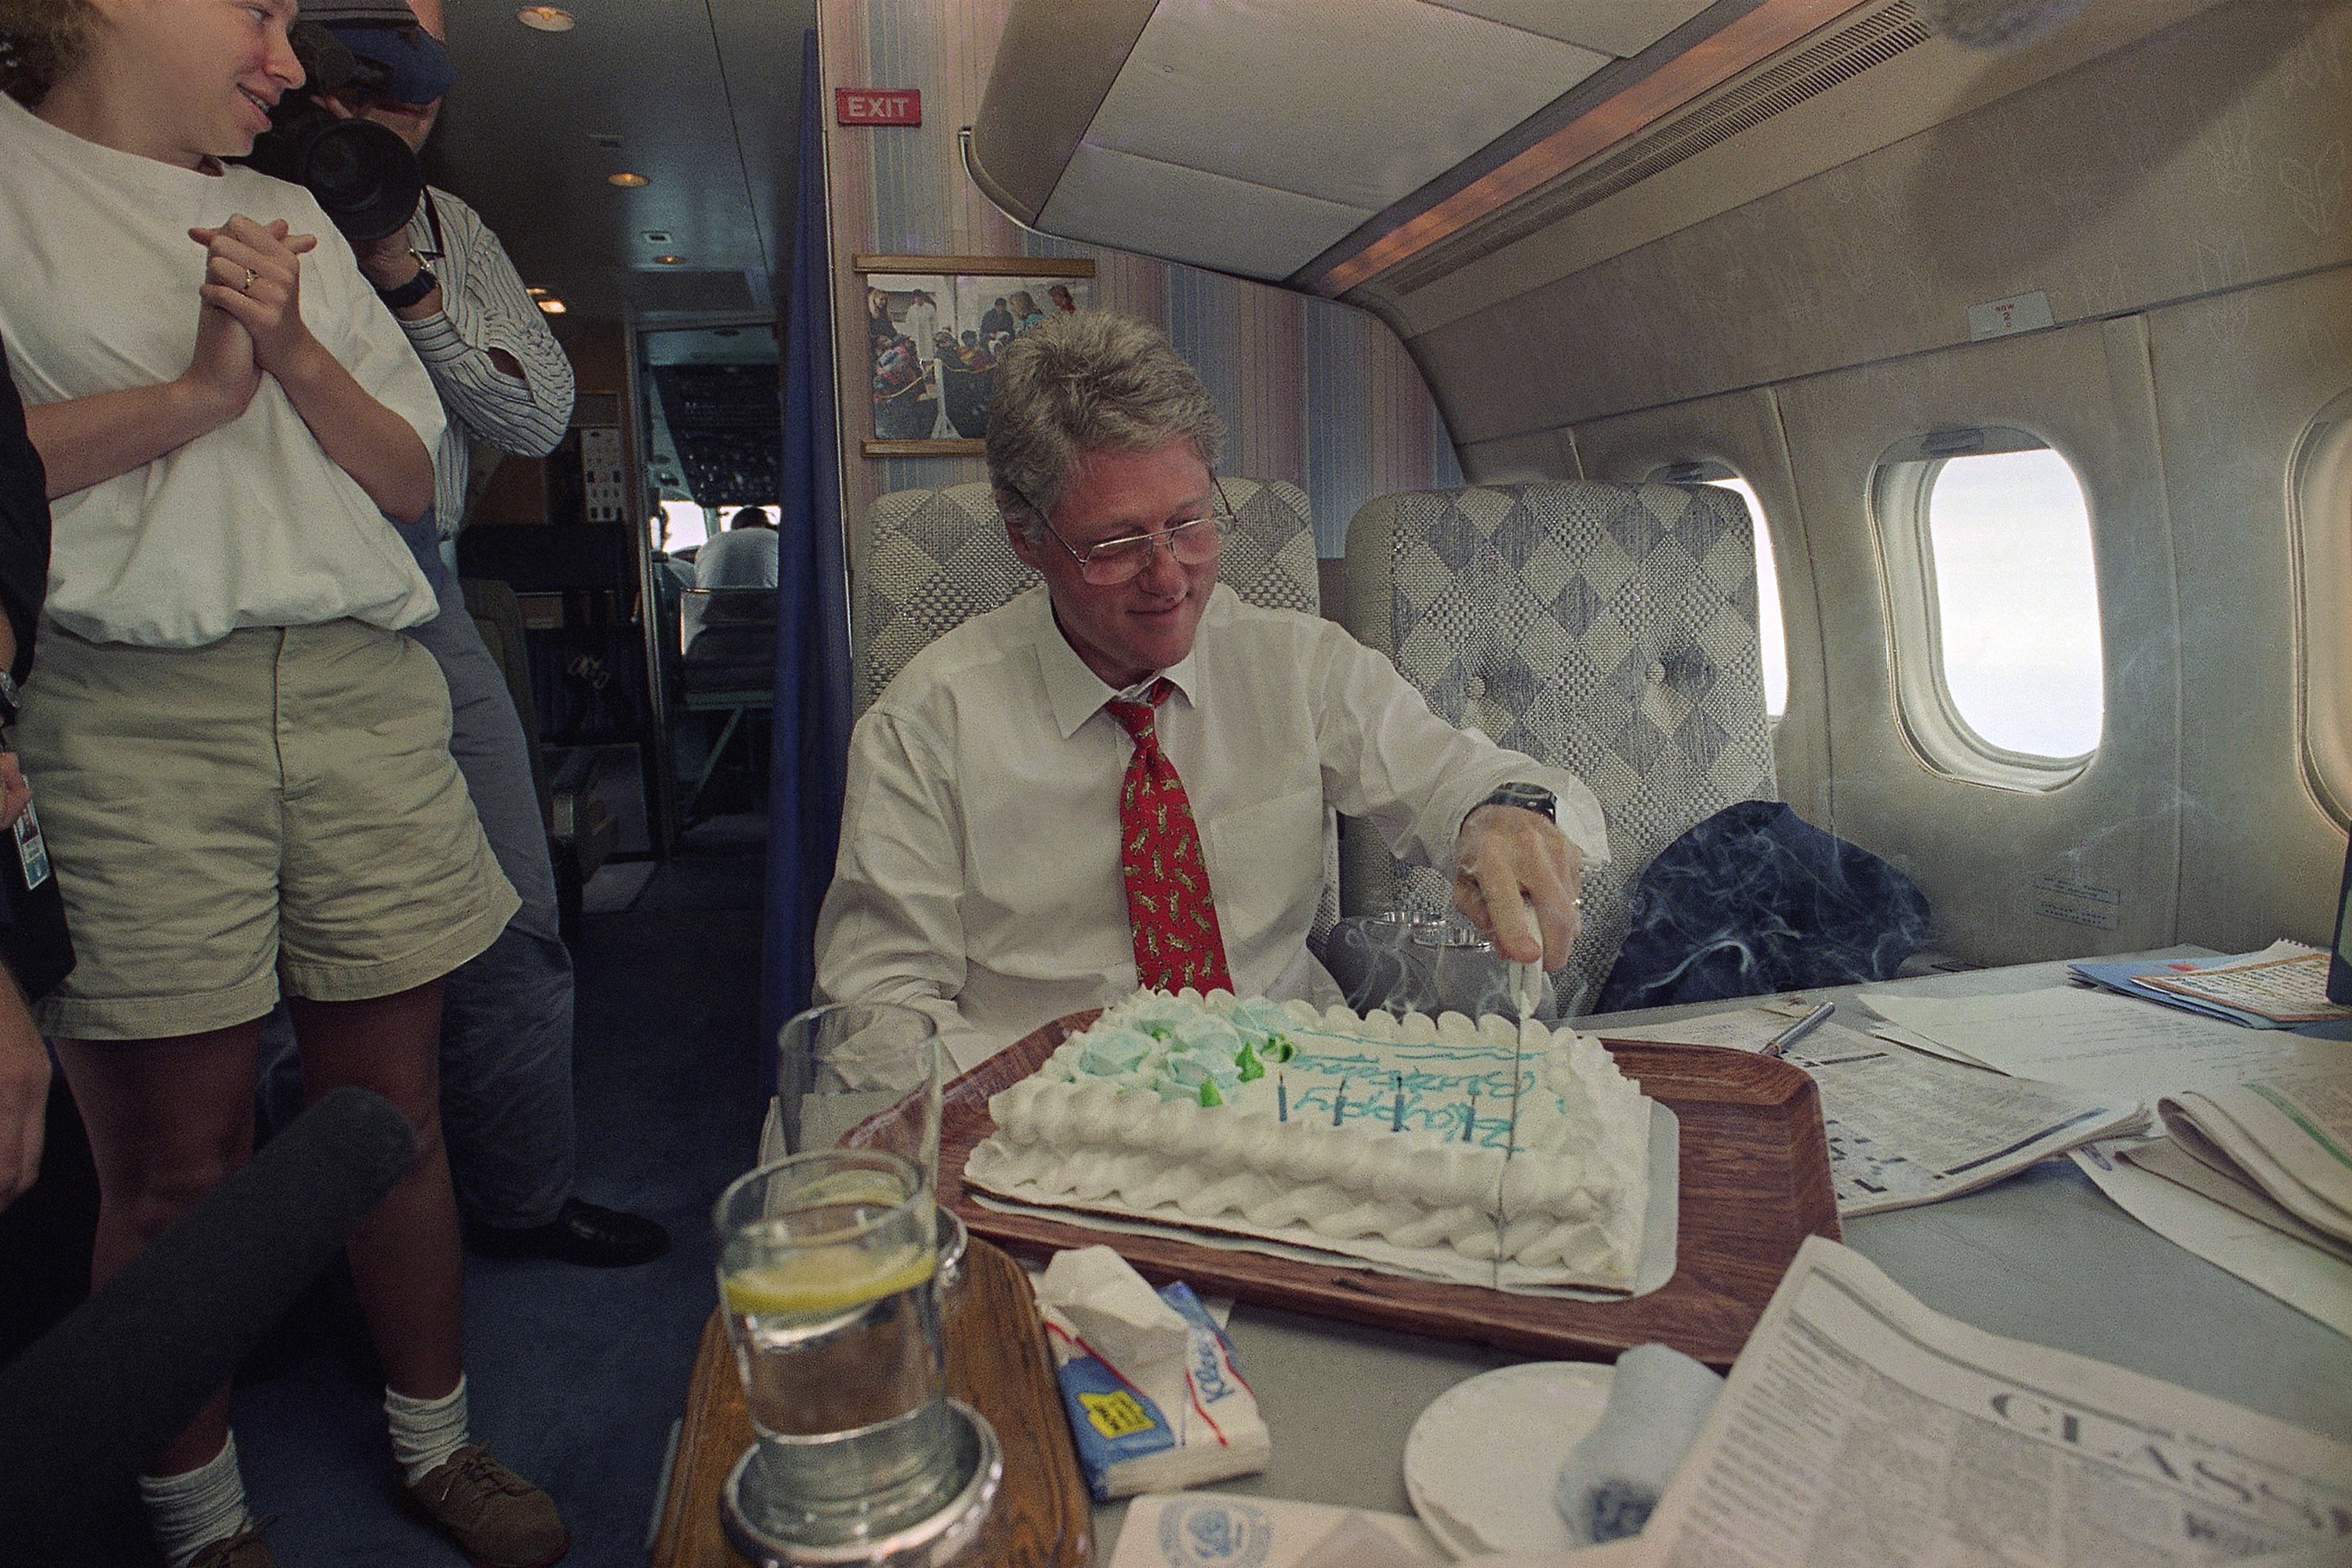 Bill Clinton cutting his birthday cake on air force one